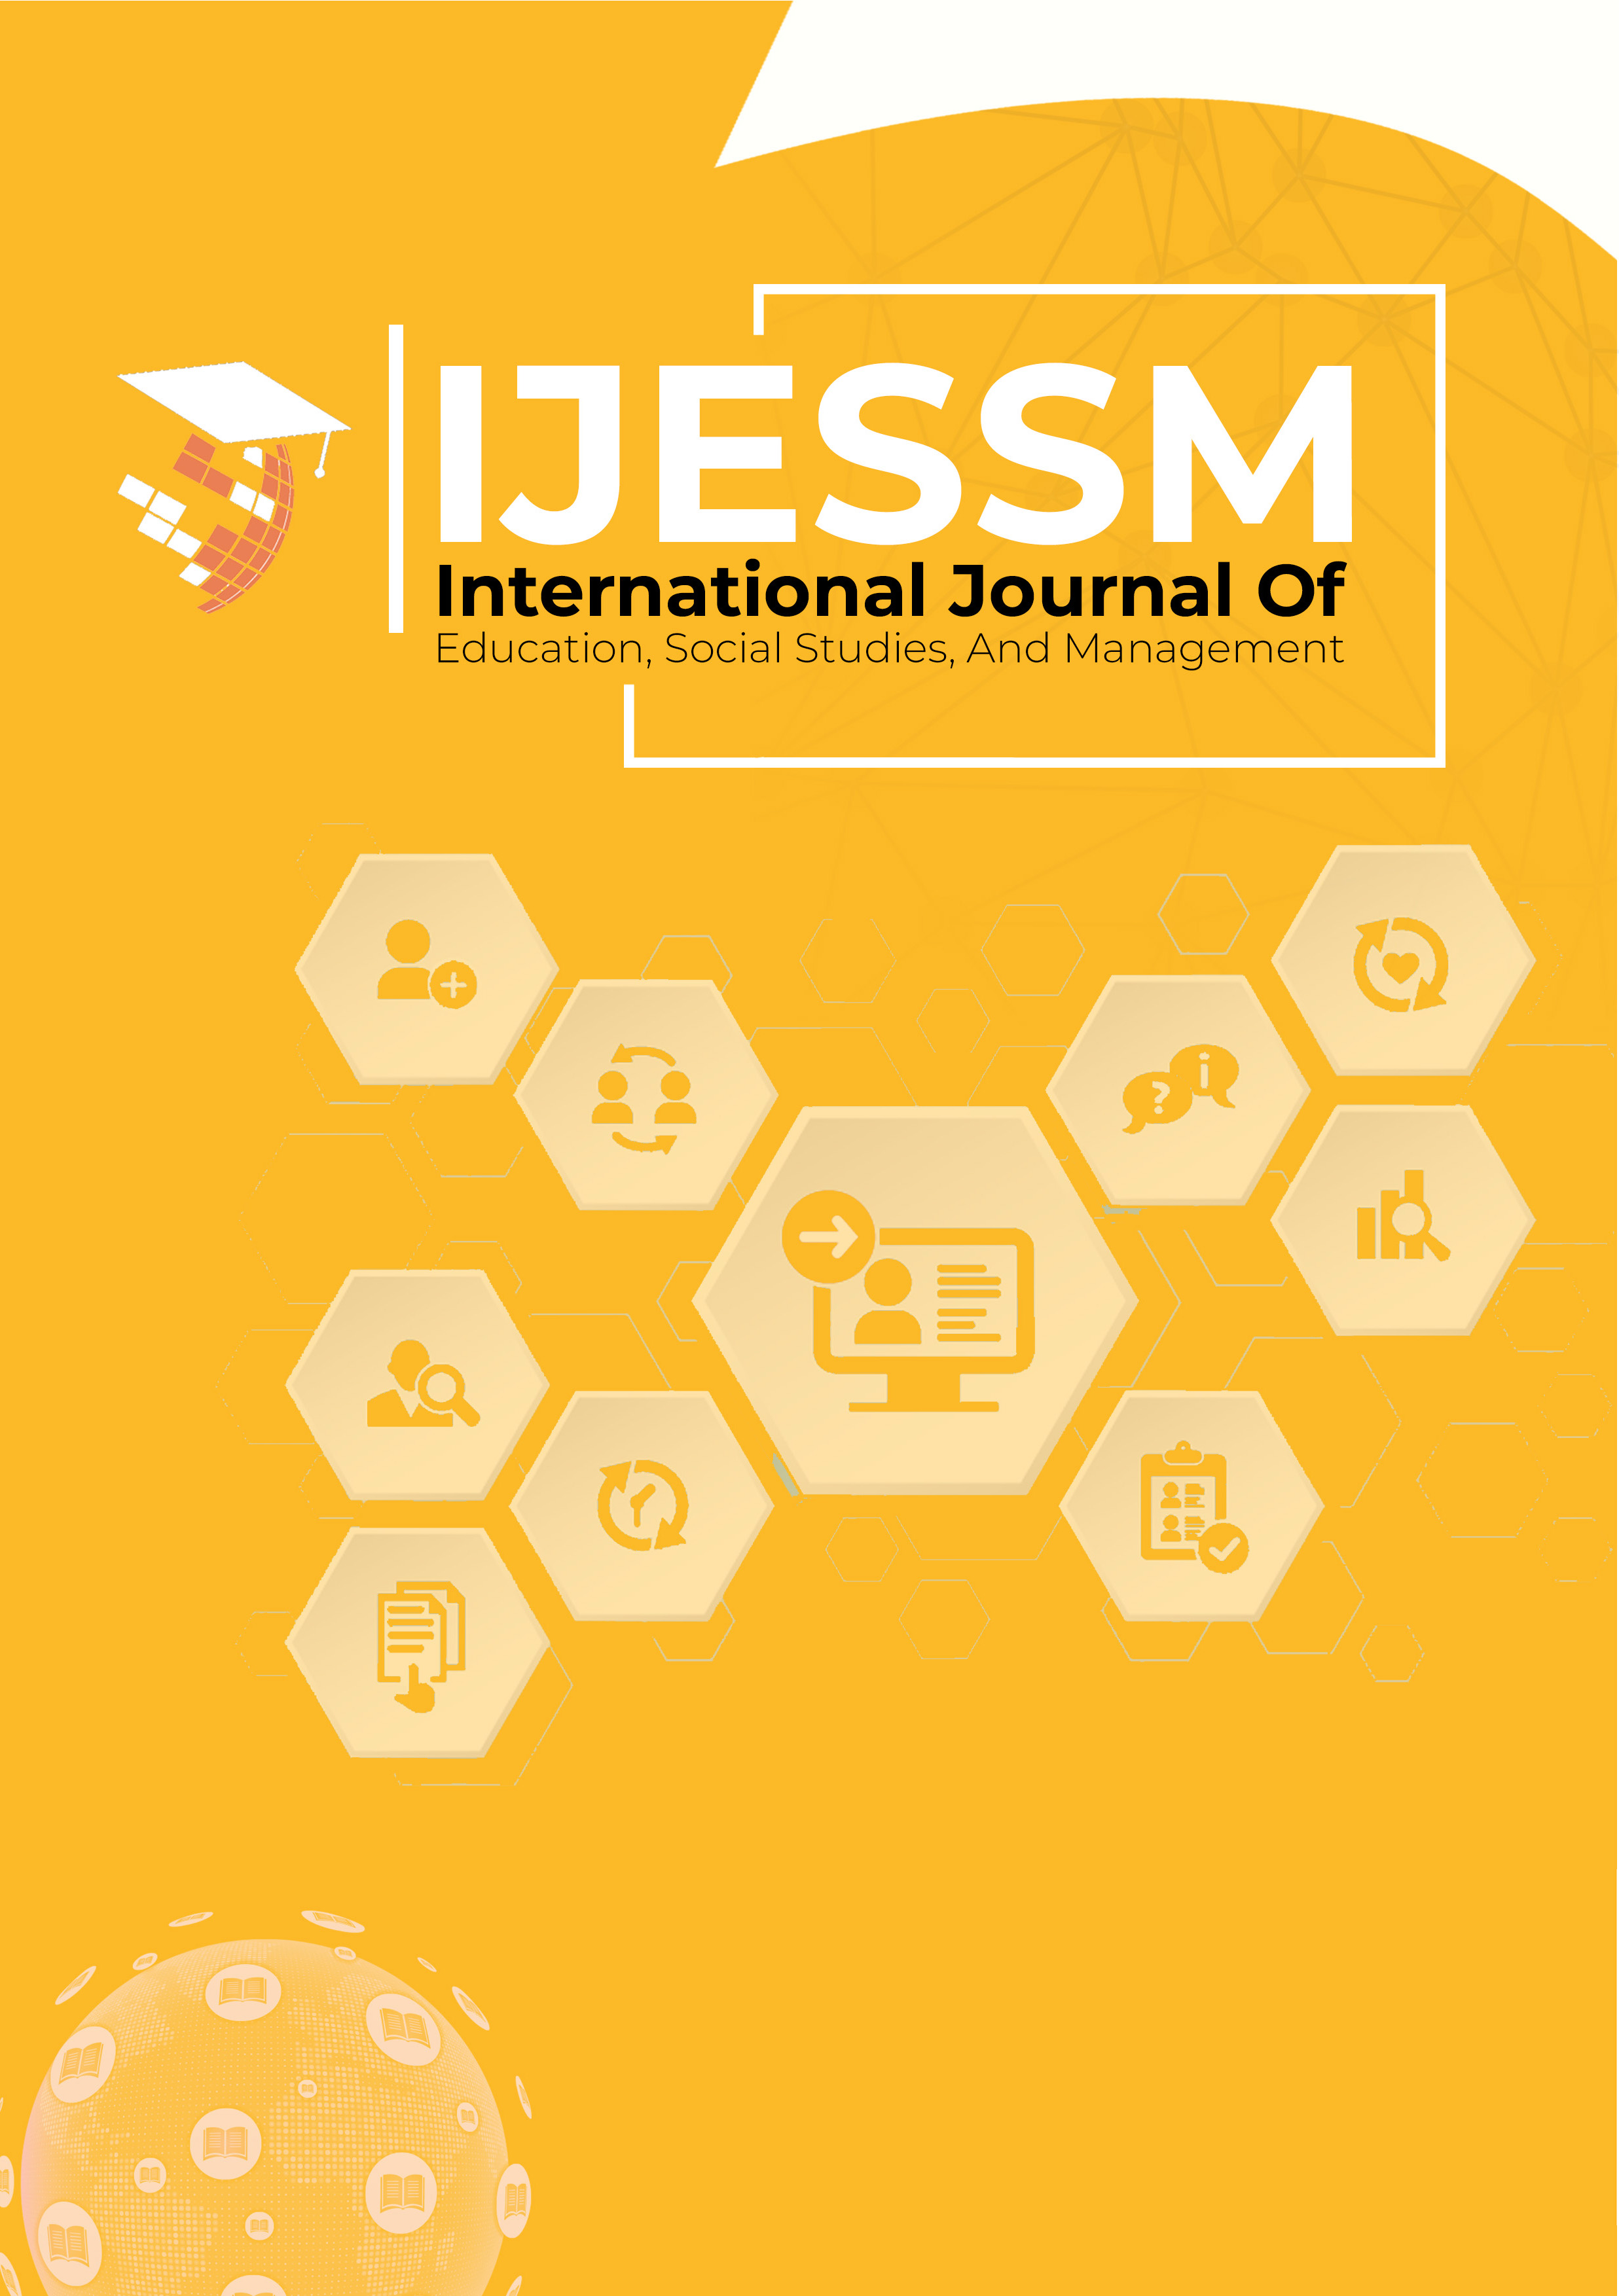 					View Vol. 2 No. 3 (2022): The International Journal of Education, Social Studies, and Management (IJESSM)
				